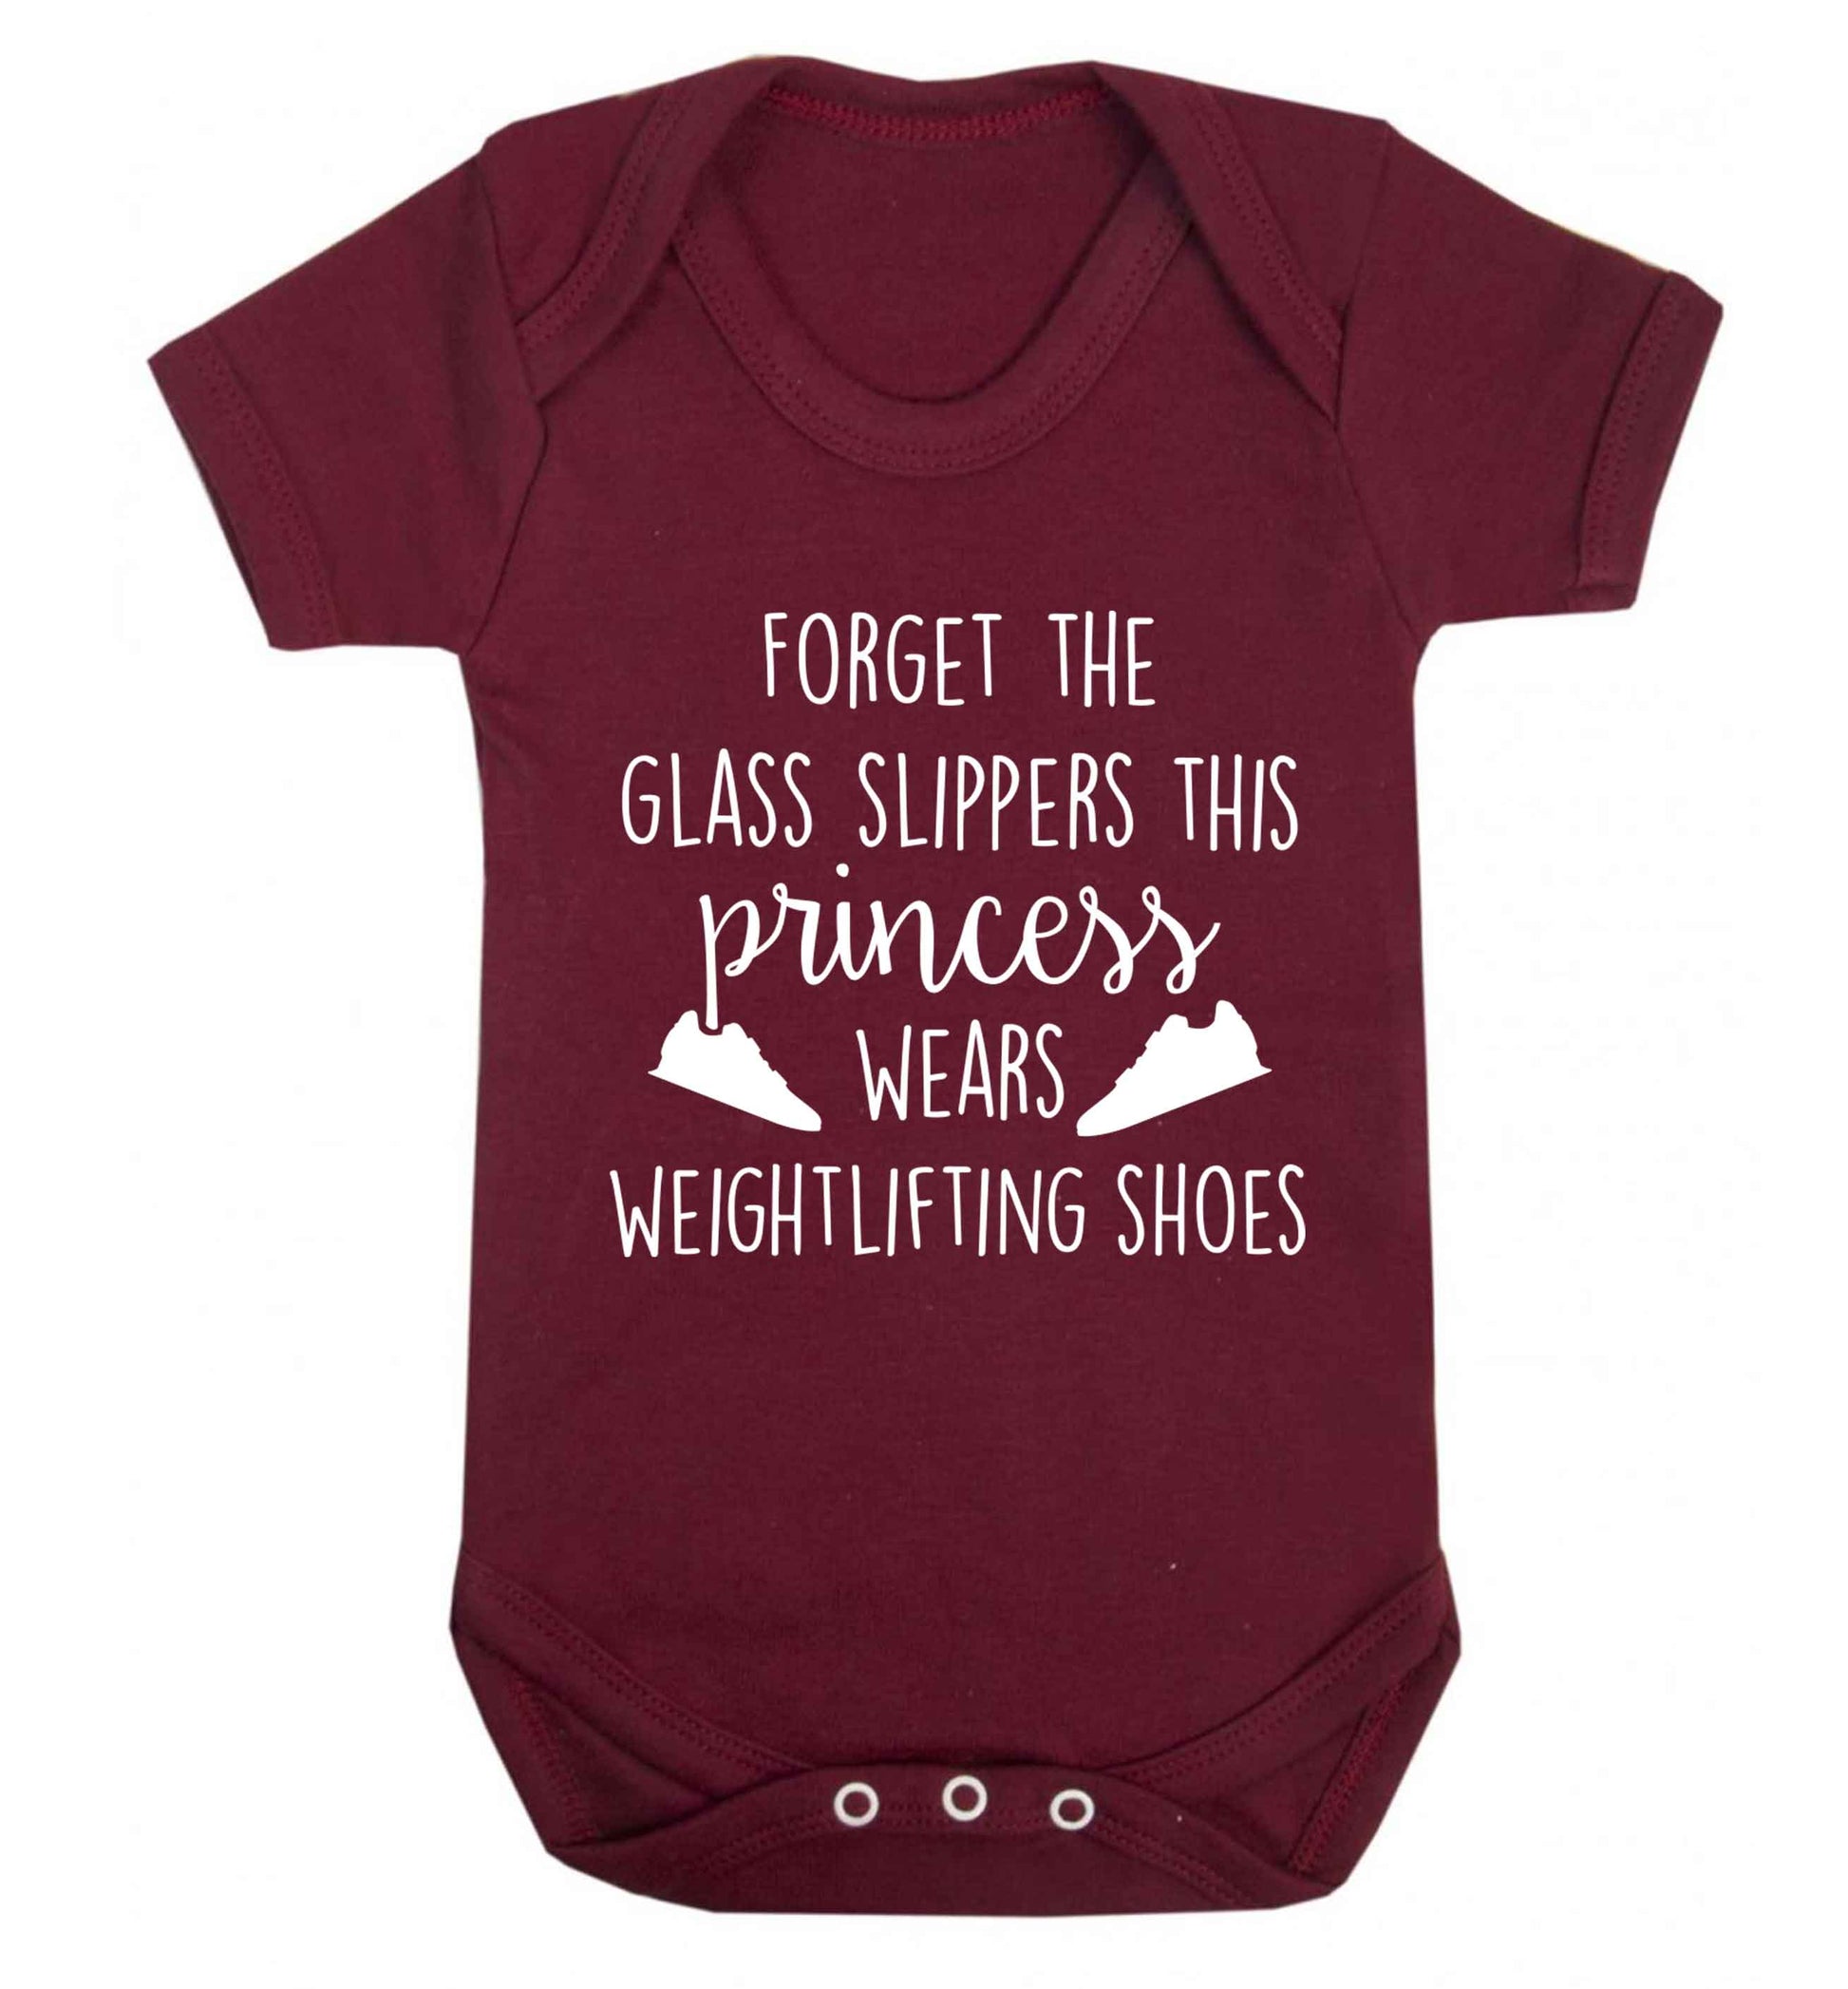 Forget the glass slippers this princess wears weightlifting shoes Baby Vest maroon 18-24 months